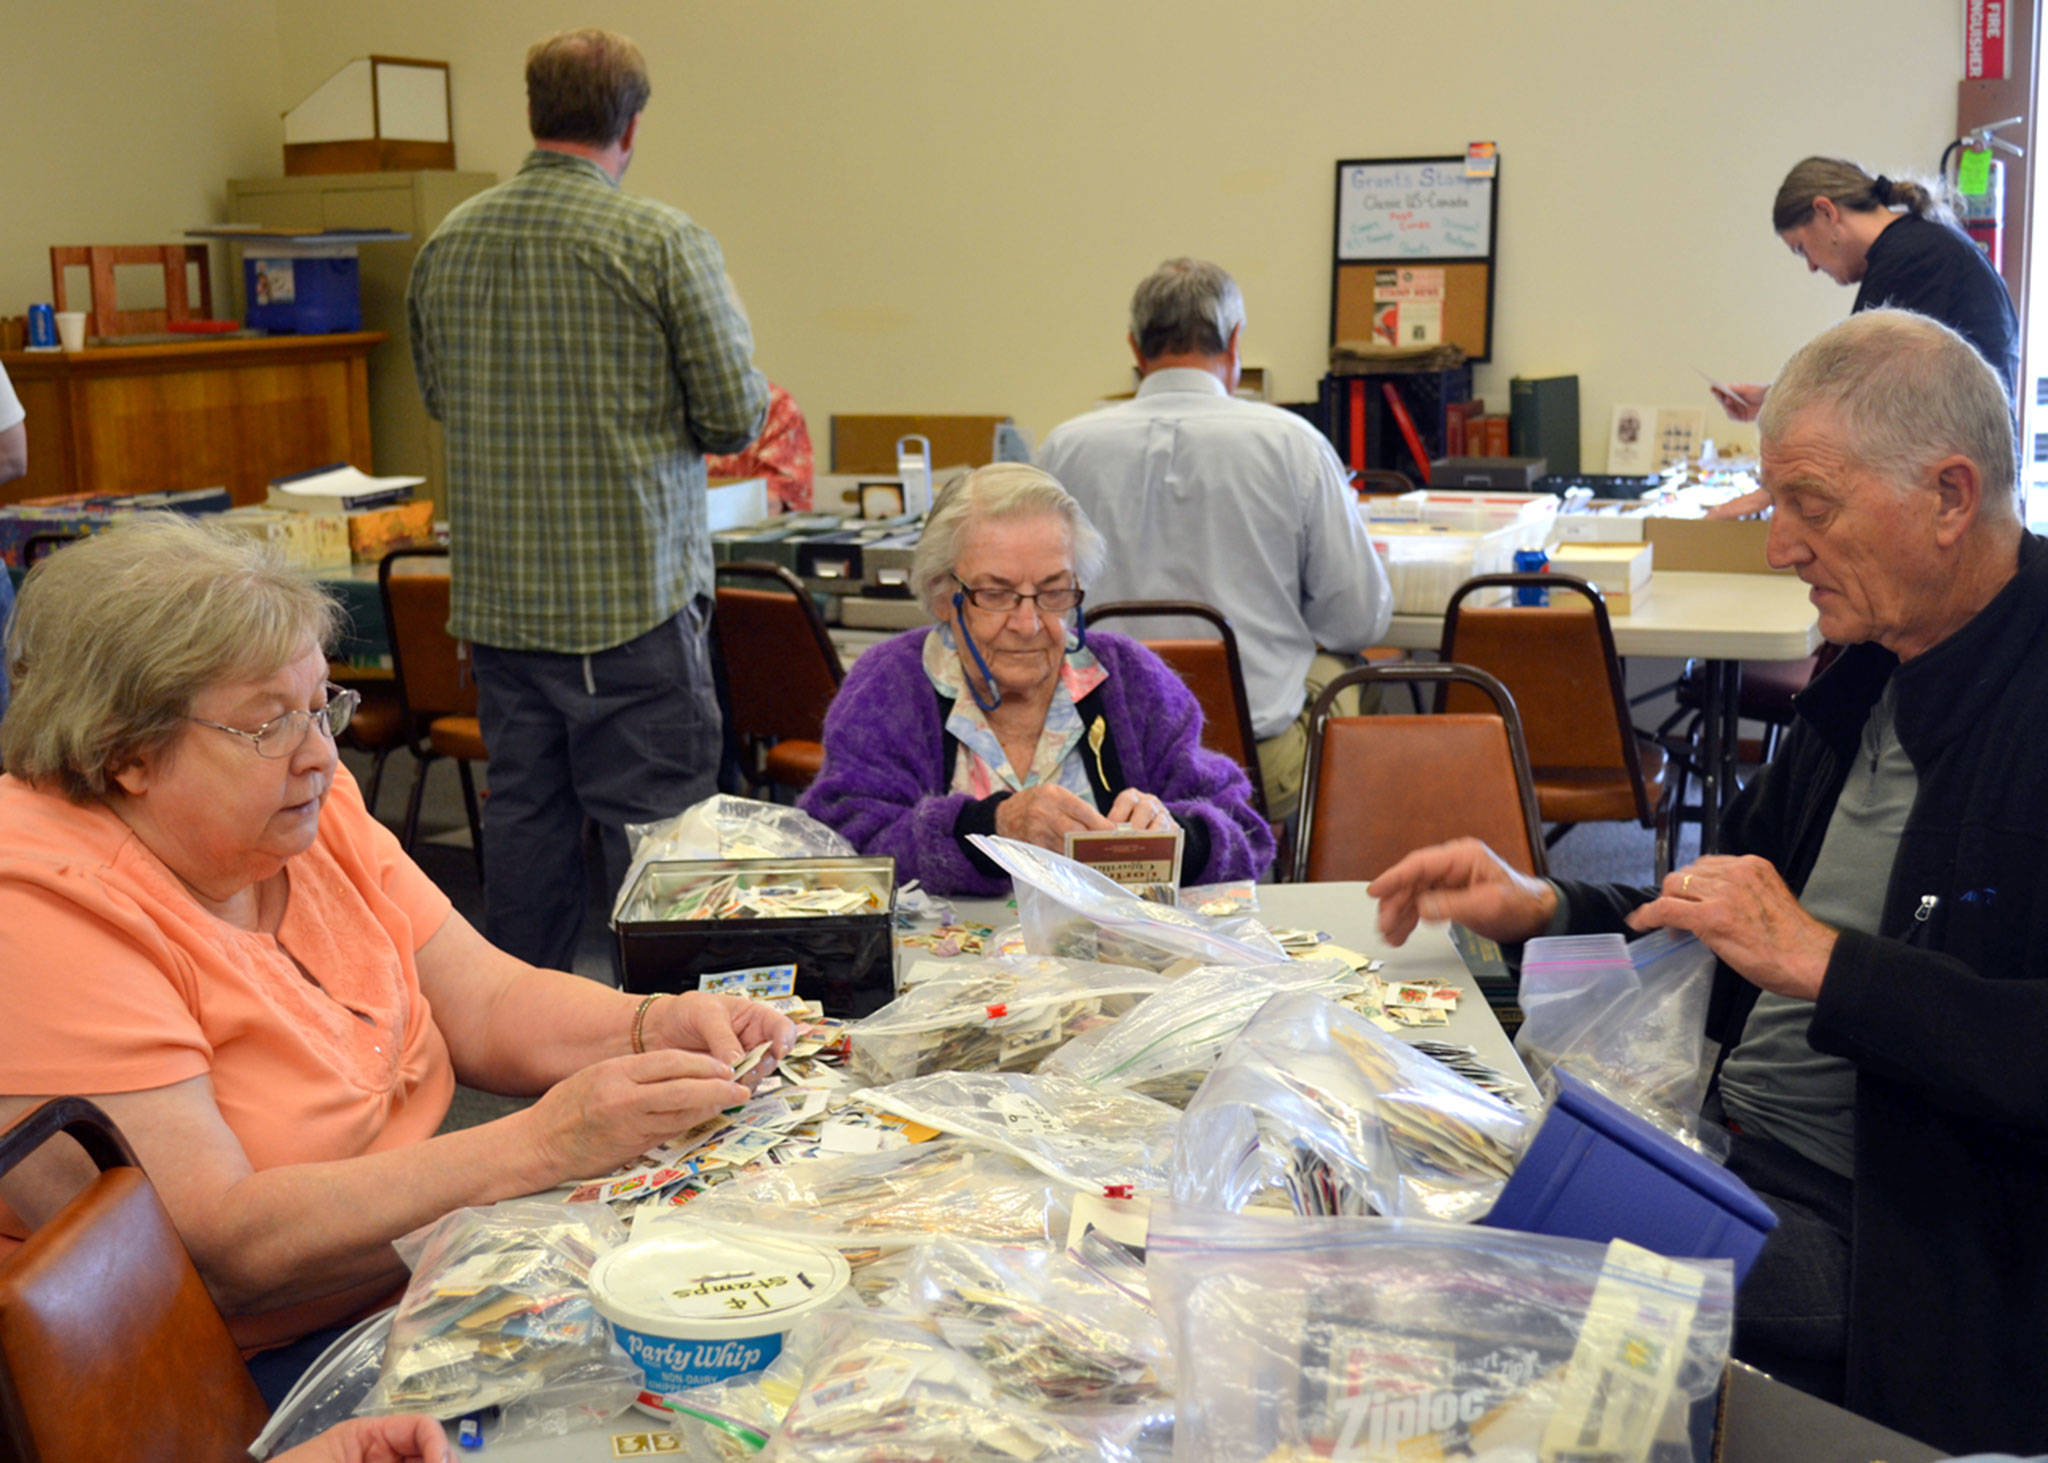 Stamp collectors, from left, Jan Schultz of Port Angeles, June Mennell of Sequim and John Plantinga of Victoria, B.C., search for stamps in the penny pile at the Strait Stamp Show in 2015 in the Sequim Masonic Lodge. This year’s 24th annual show is Saturday with 15-plus vendors and plenty of stamps to go around. (Matthew Nash/Olympic Peninsula News Group)